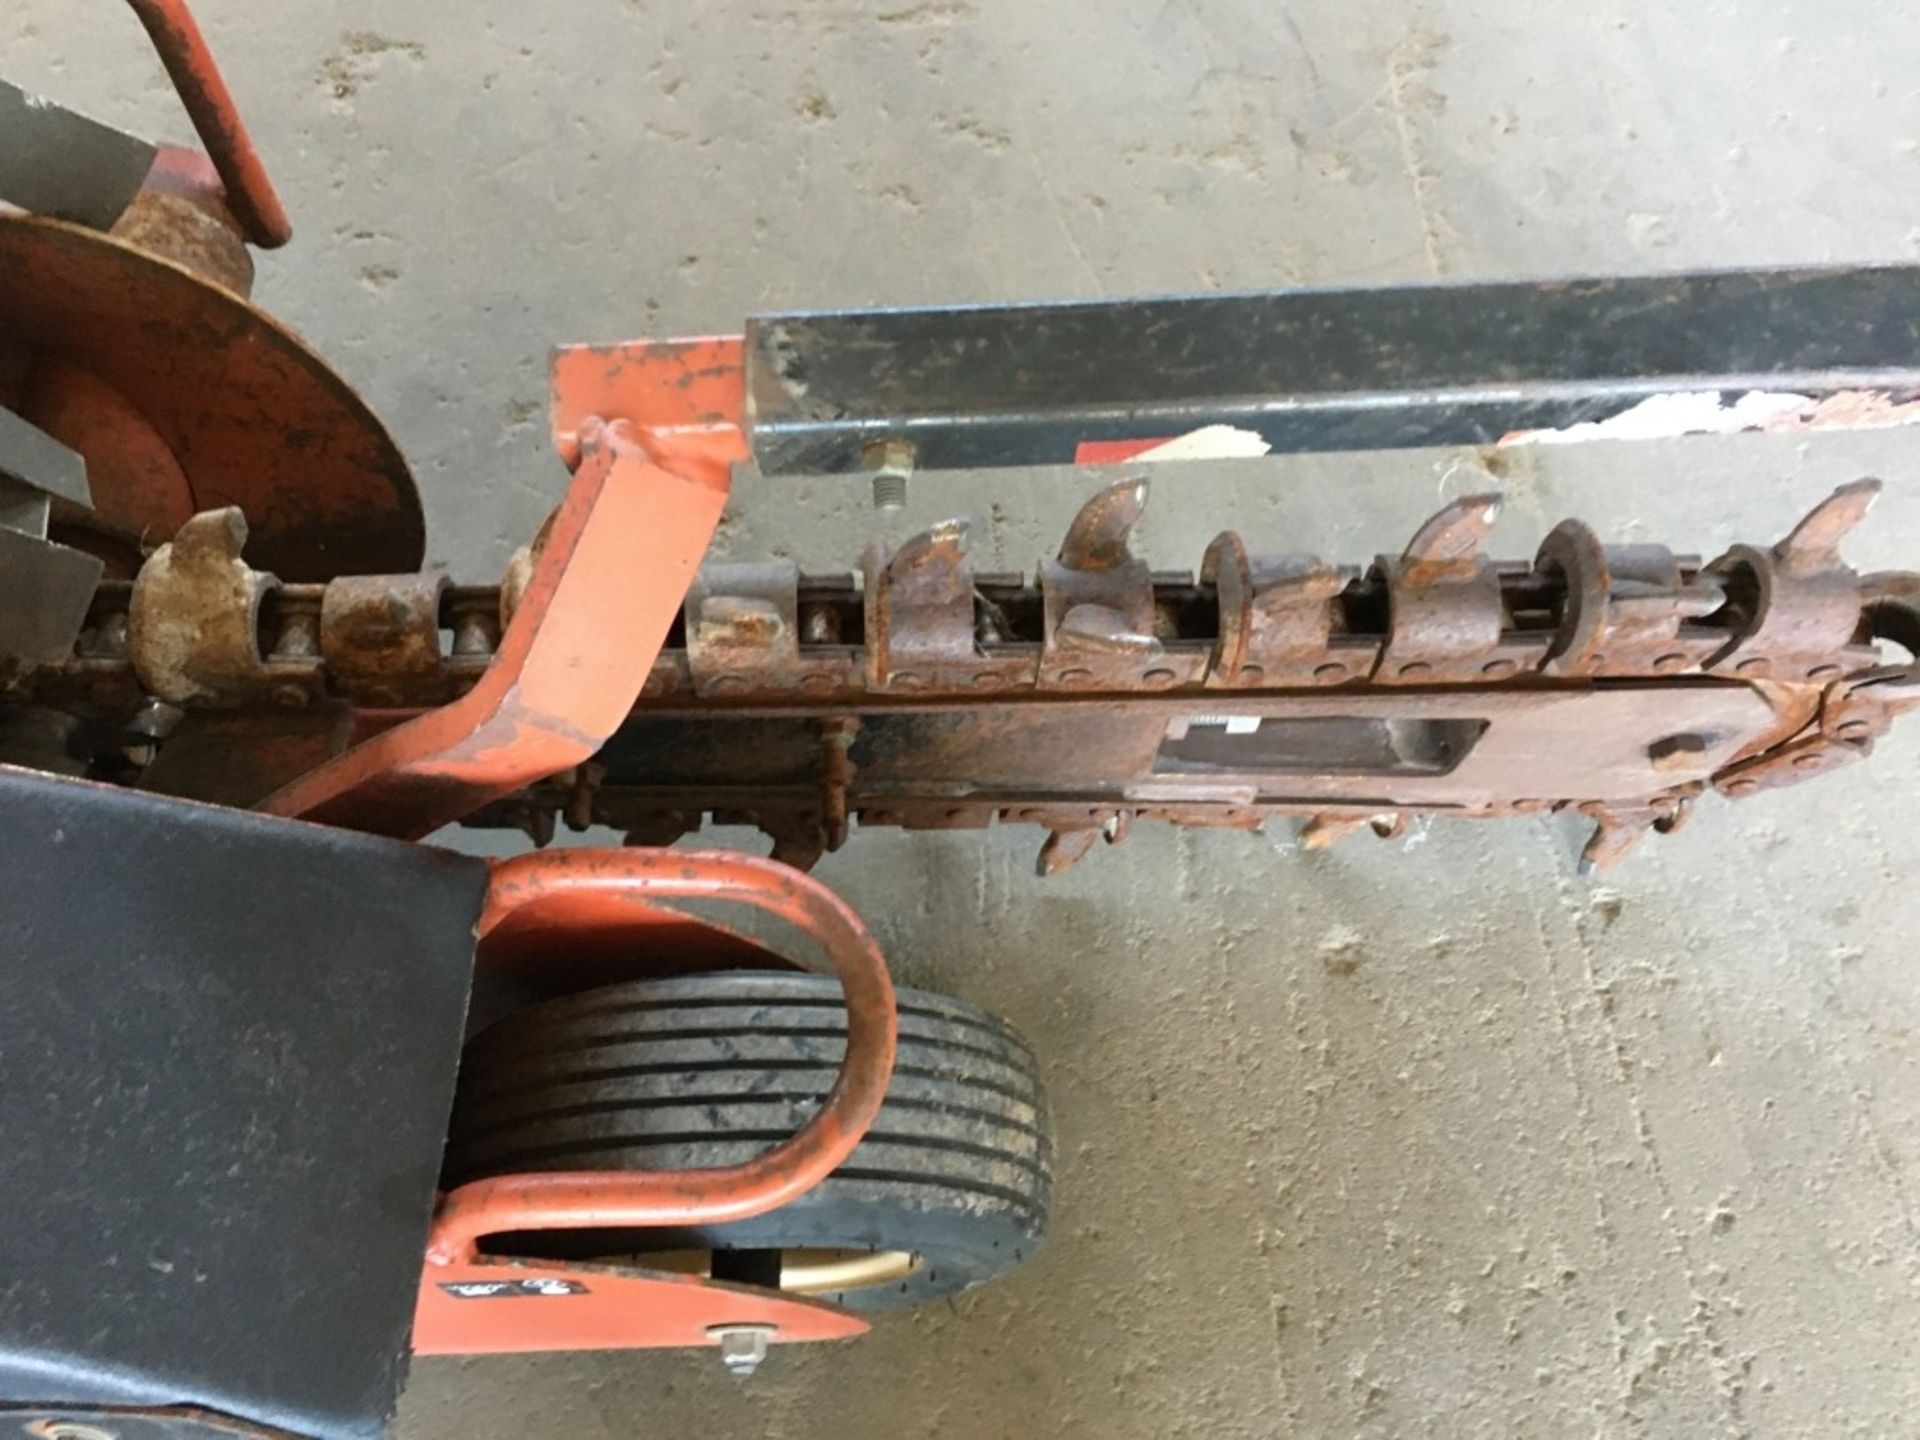 2005 Ditch Witch 1030 Walk Behind Trencher - Image 10 of 19